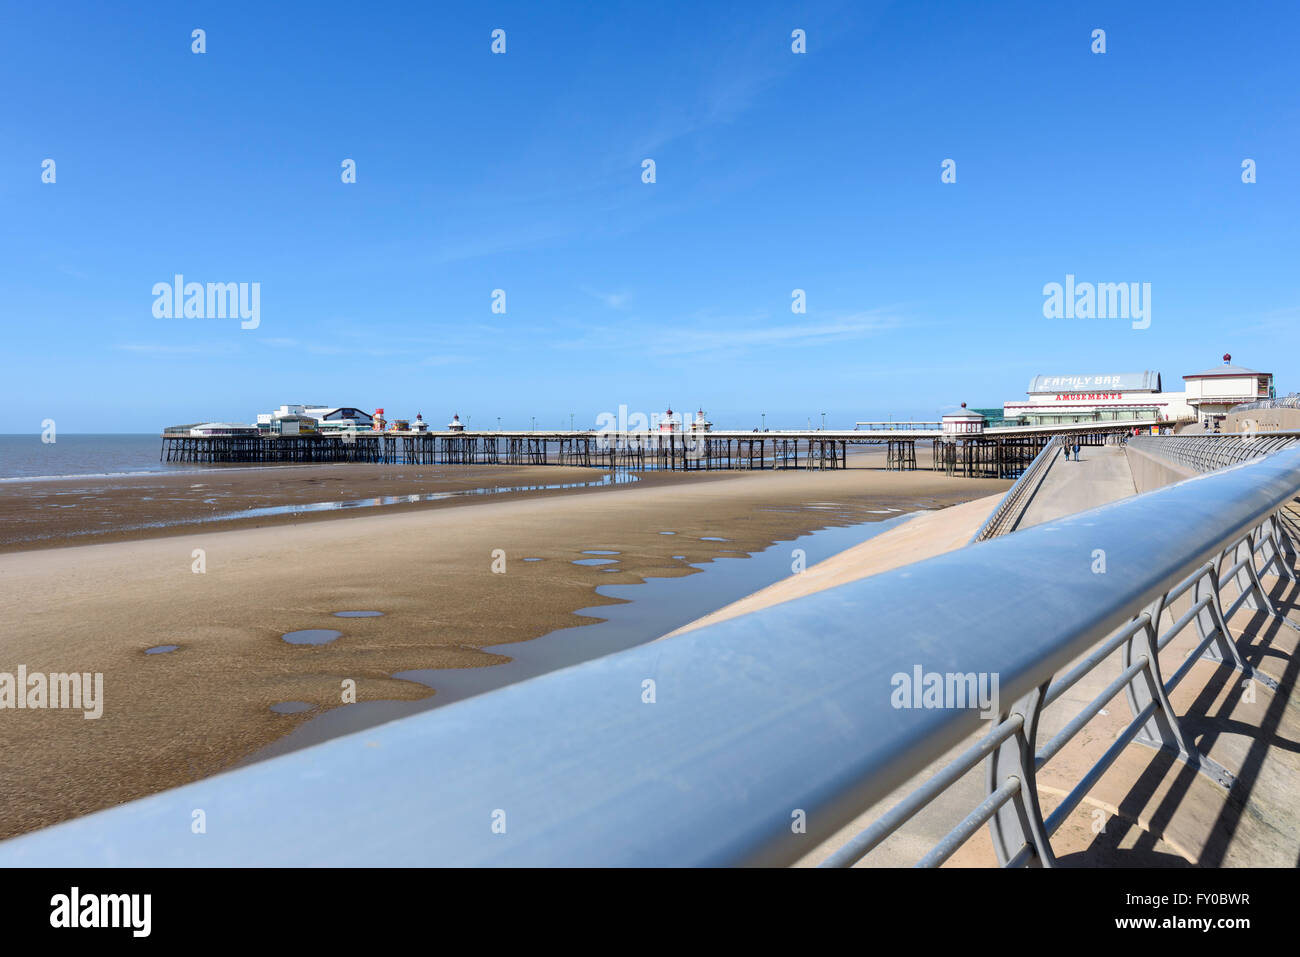 Under a bright blue sky, the view from the promenade across the sandy beach to North Pier in Blackpool, Lancashire Stock Photo